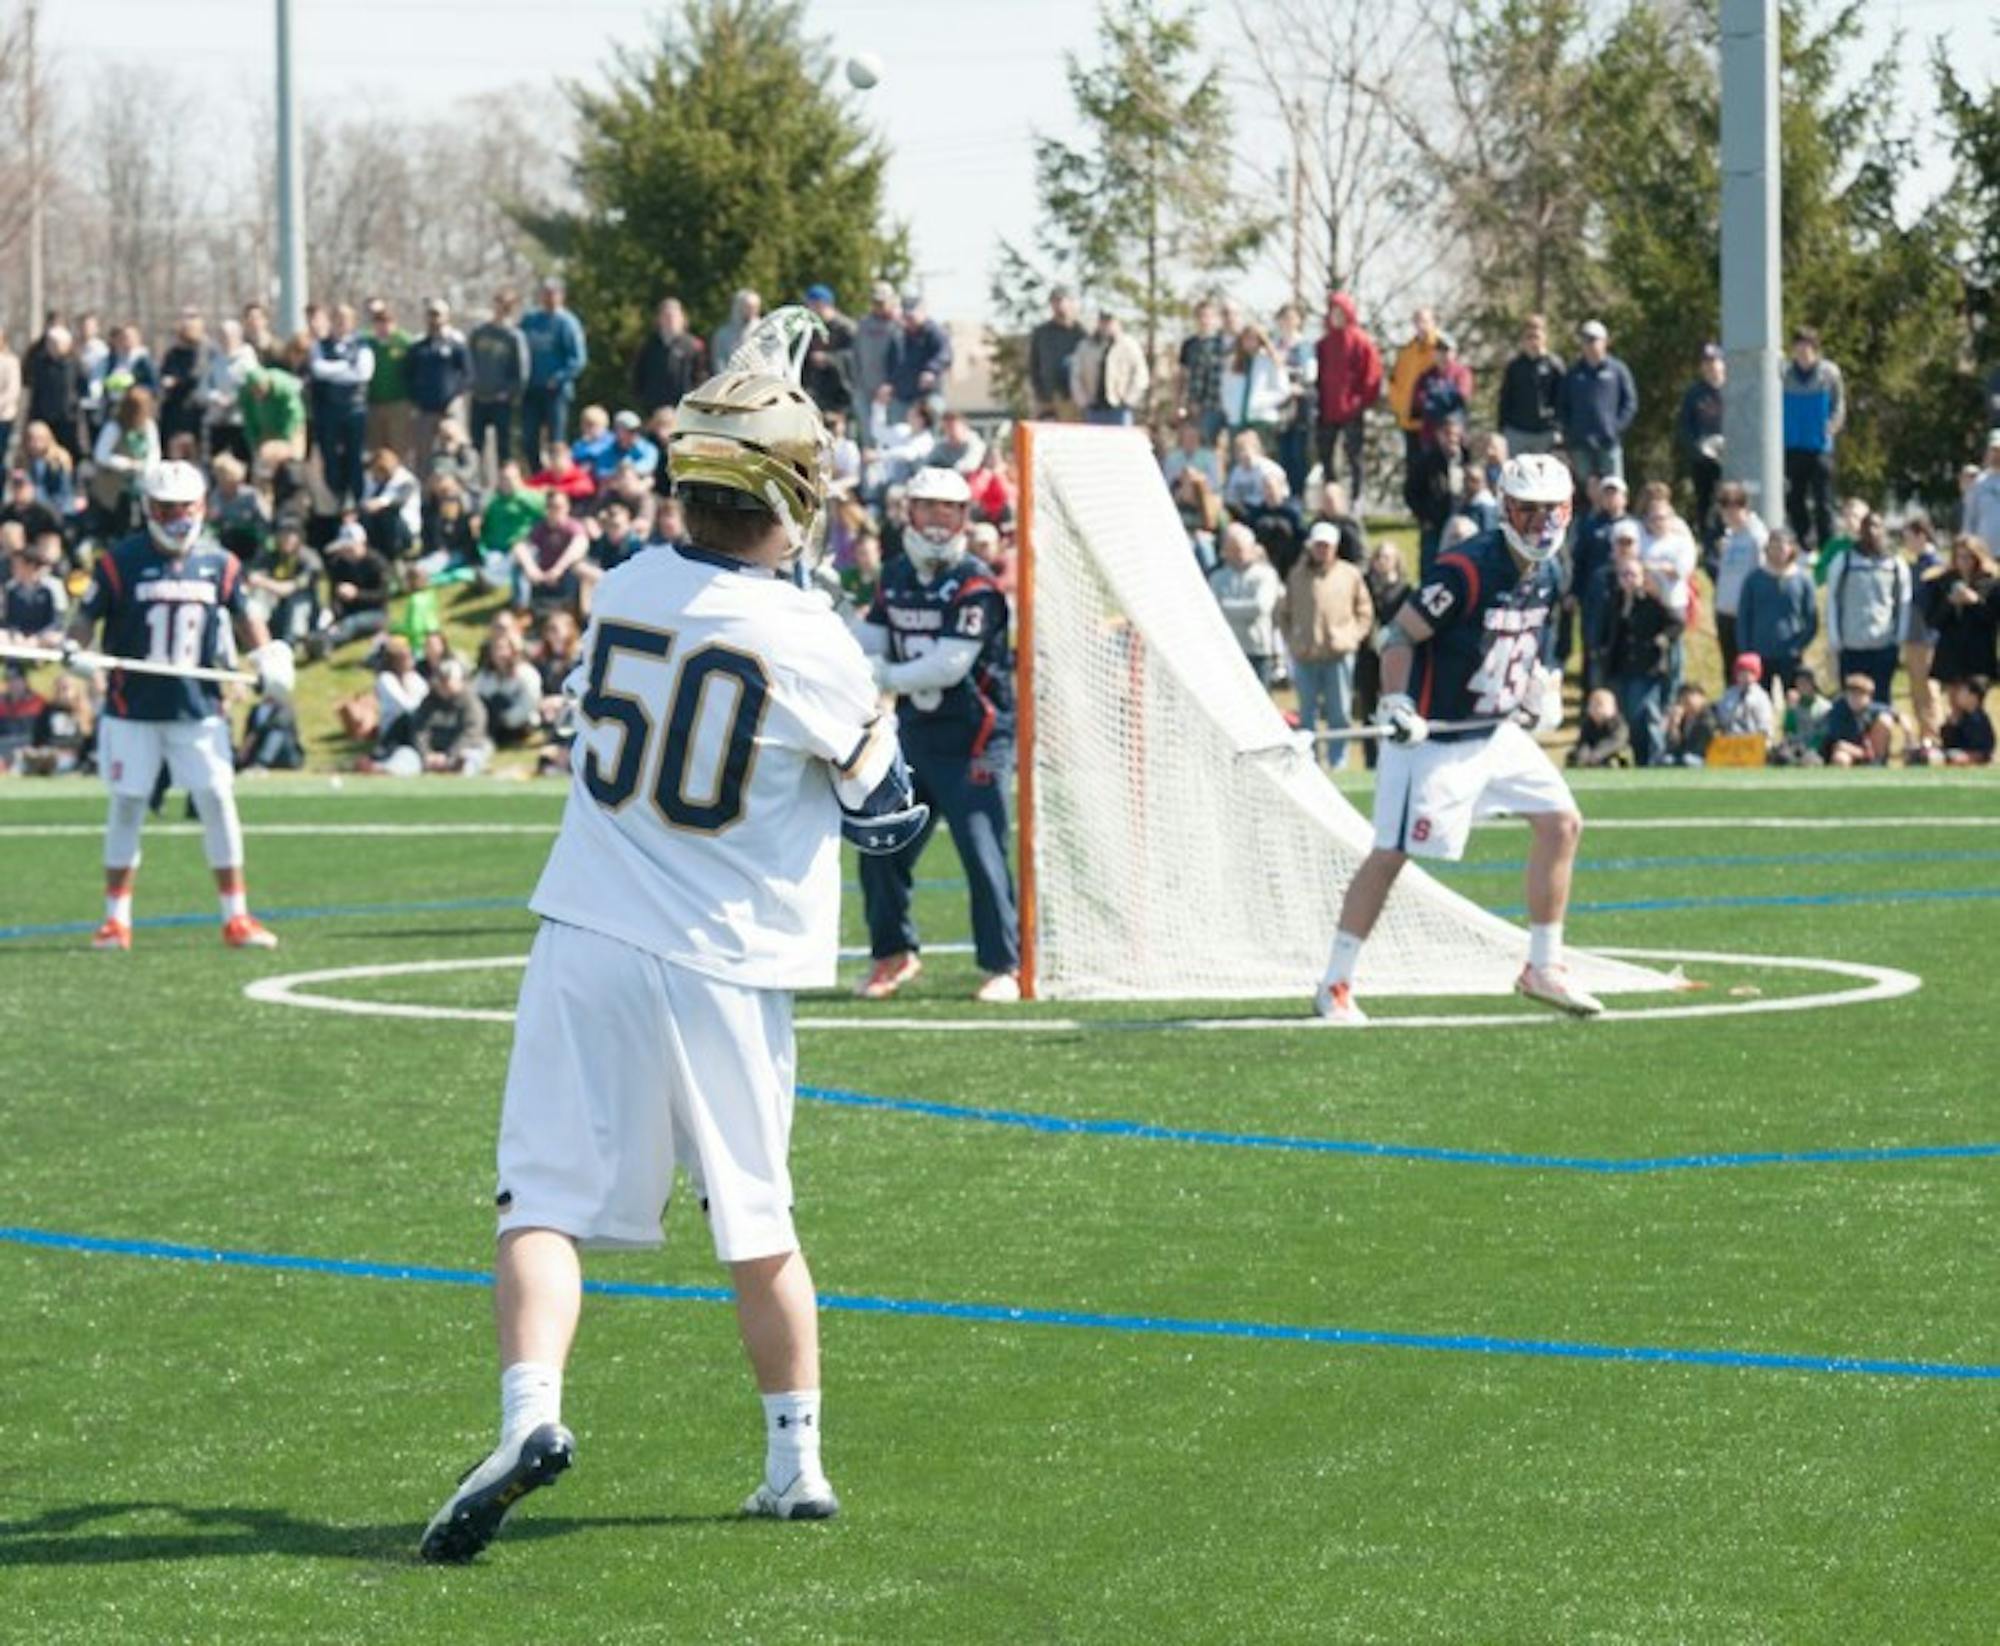 Irish sophomore attack Ryder Garnsey passes the ball during Notre Dame’s 11-10 loss to Syracuse on April 1 at Arlotta Stadium.